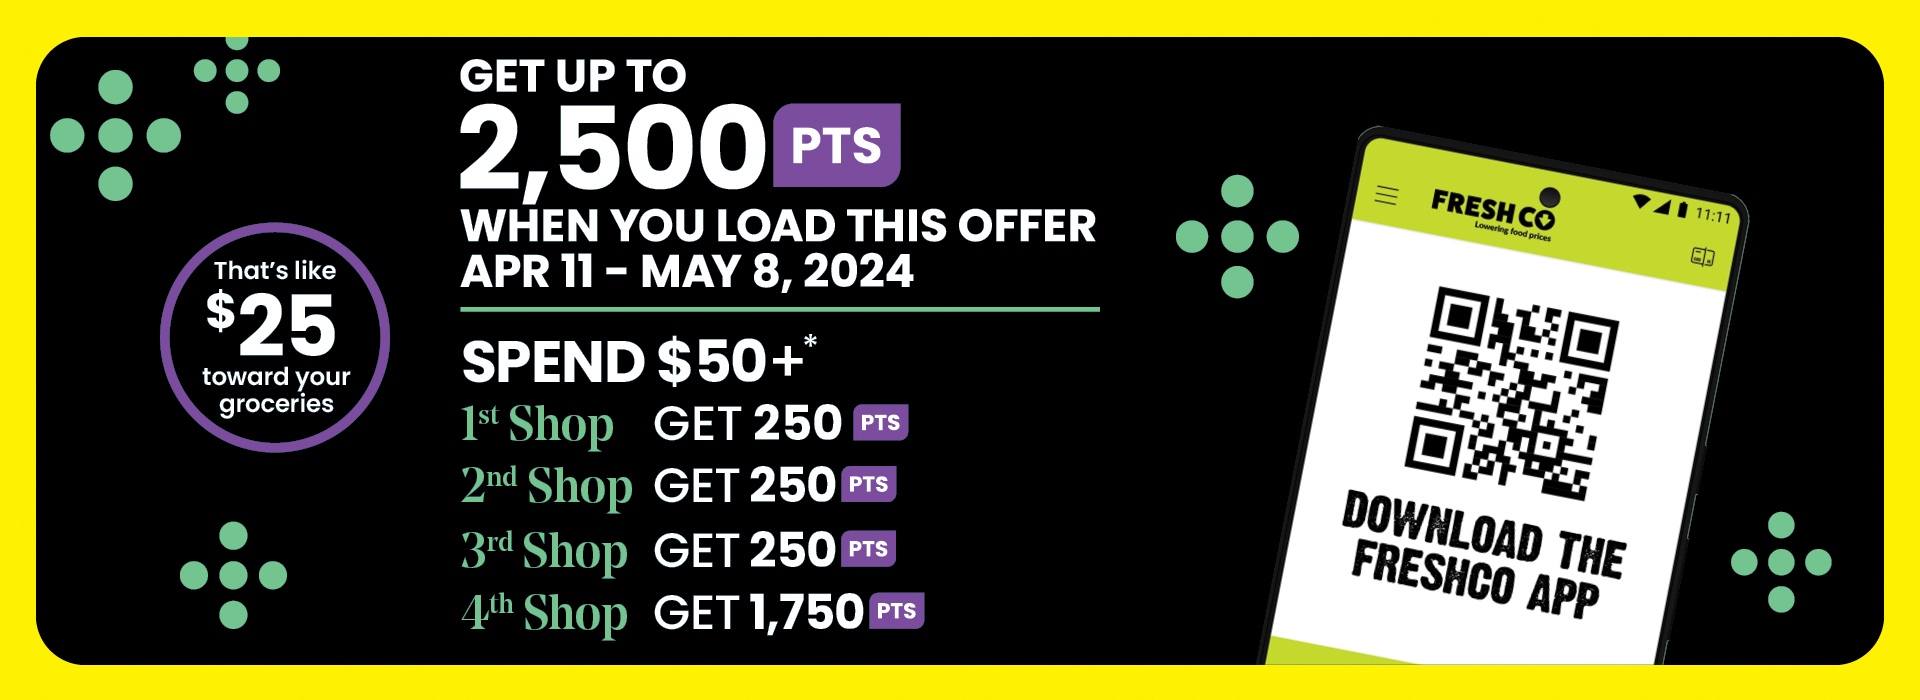 The following image contains the text, "Get up to 2,500 PTS when you load this offer Apr 11-May 8, 2024. Spend $50+*. 1st Shop Get 250 PTS, 2nd Shop Get 250 PTS, 3rd Shop Get 250 PTS, 4th Shop Get 1,750 PTS. That's like $25 toward your groceries."